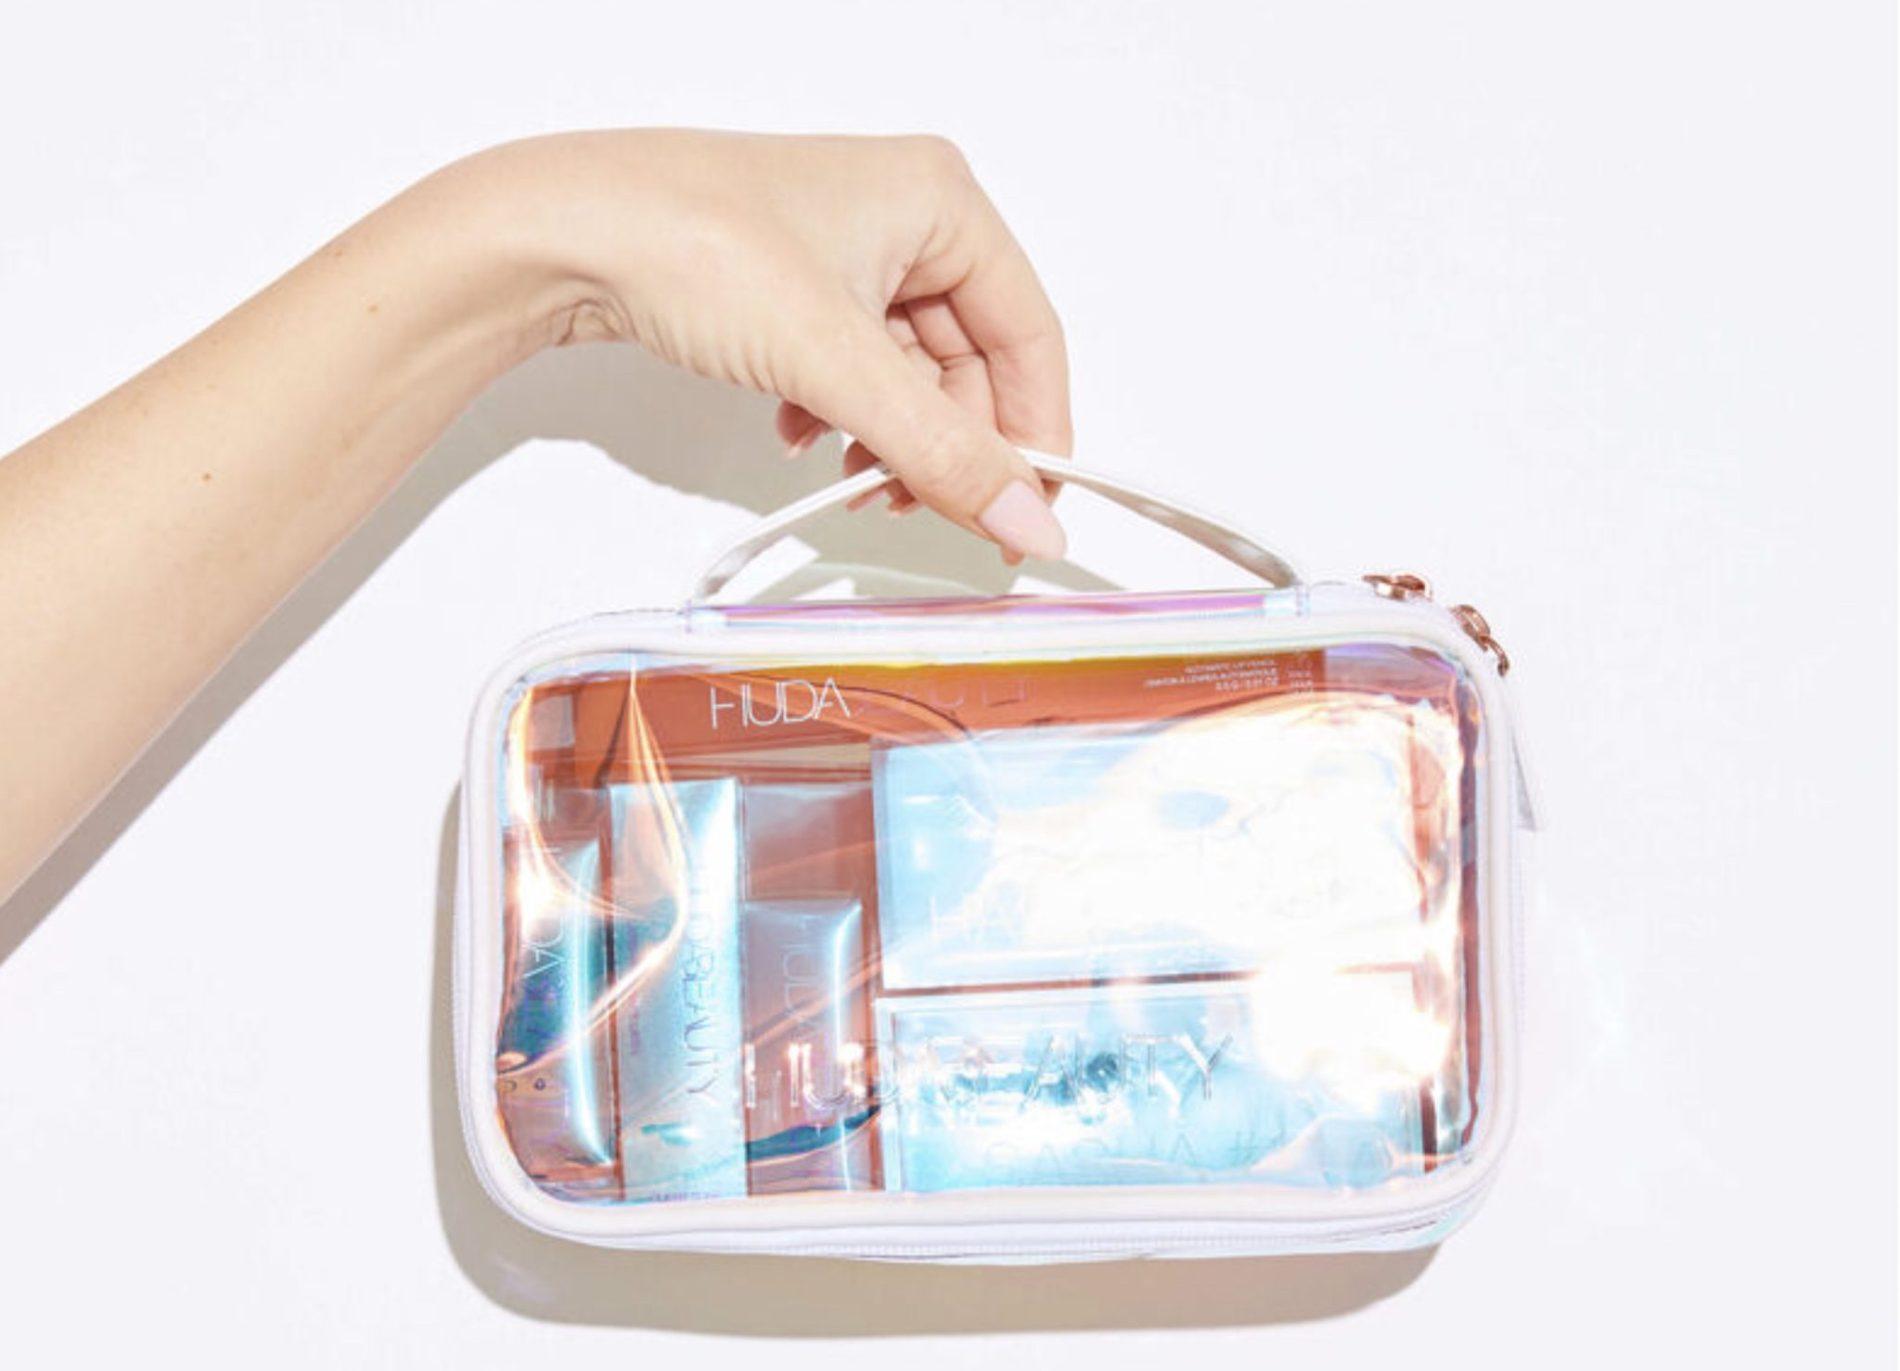 HUDA Beauty “Day to Night” Mystery Bag – On Sale Now